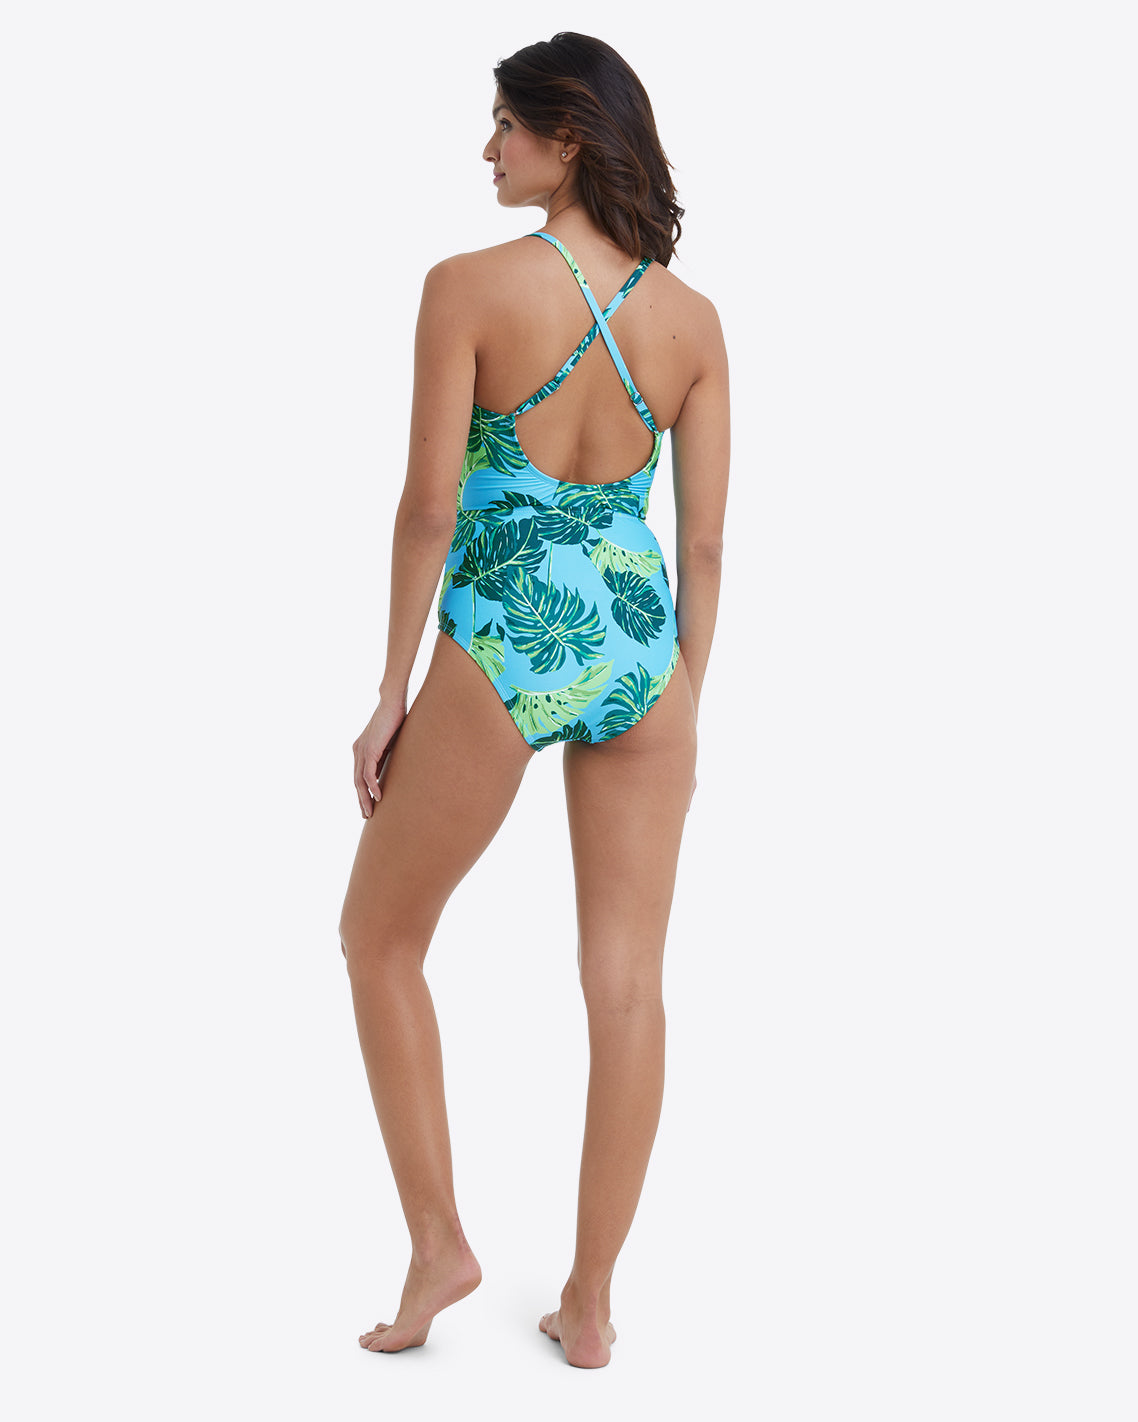 FLASH SALE! Kohls Swimsuits Start At $12, And You Can Take 20 Percent Off  Today